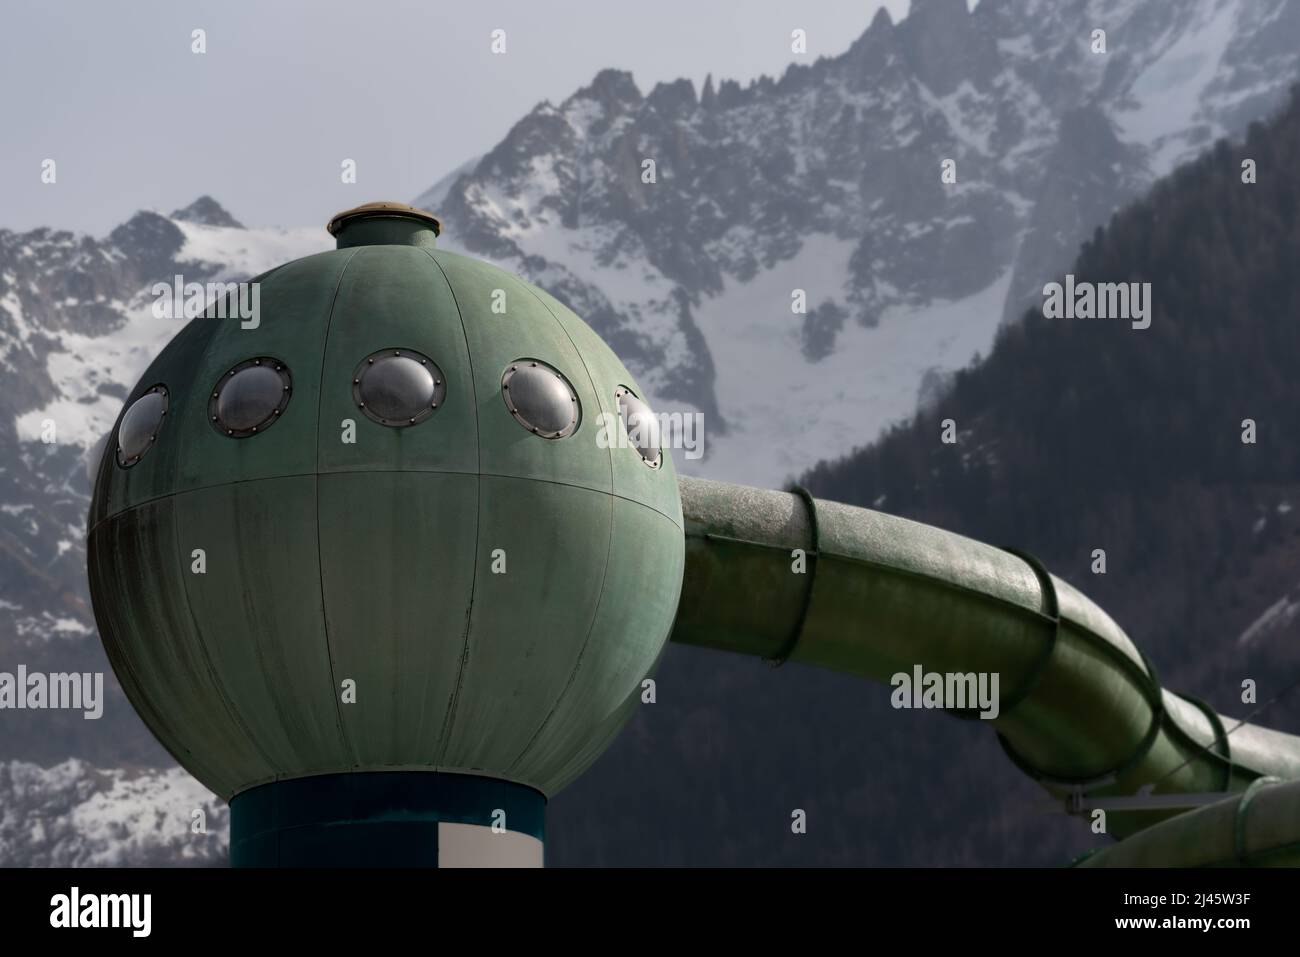 Green sphere and tubes in close-up architectural detail of waterslide feature with background of a mountain ridge in the European Alps Stock Photo